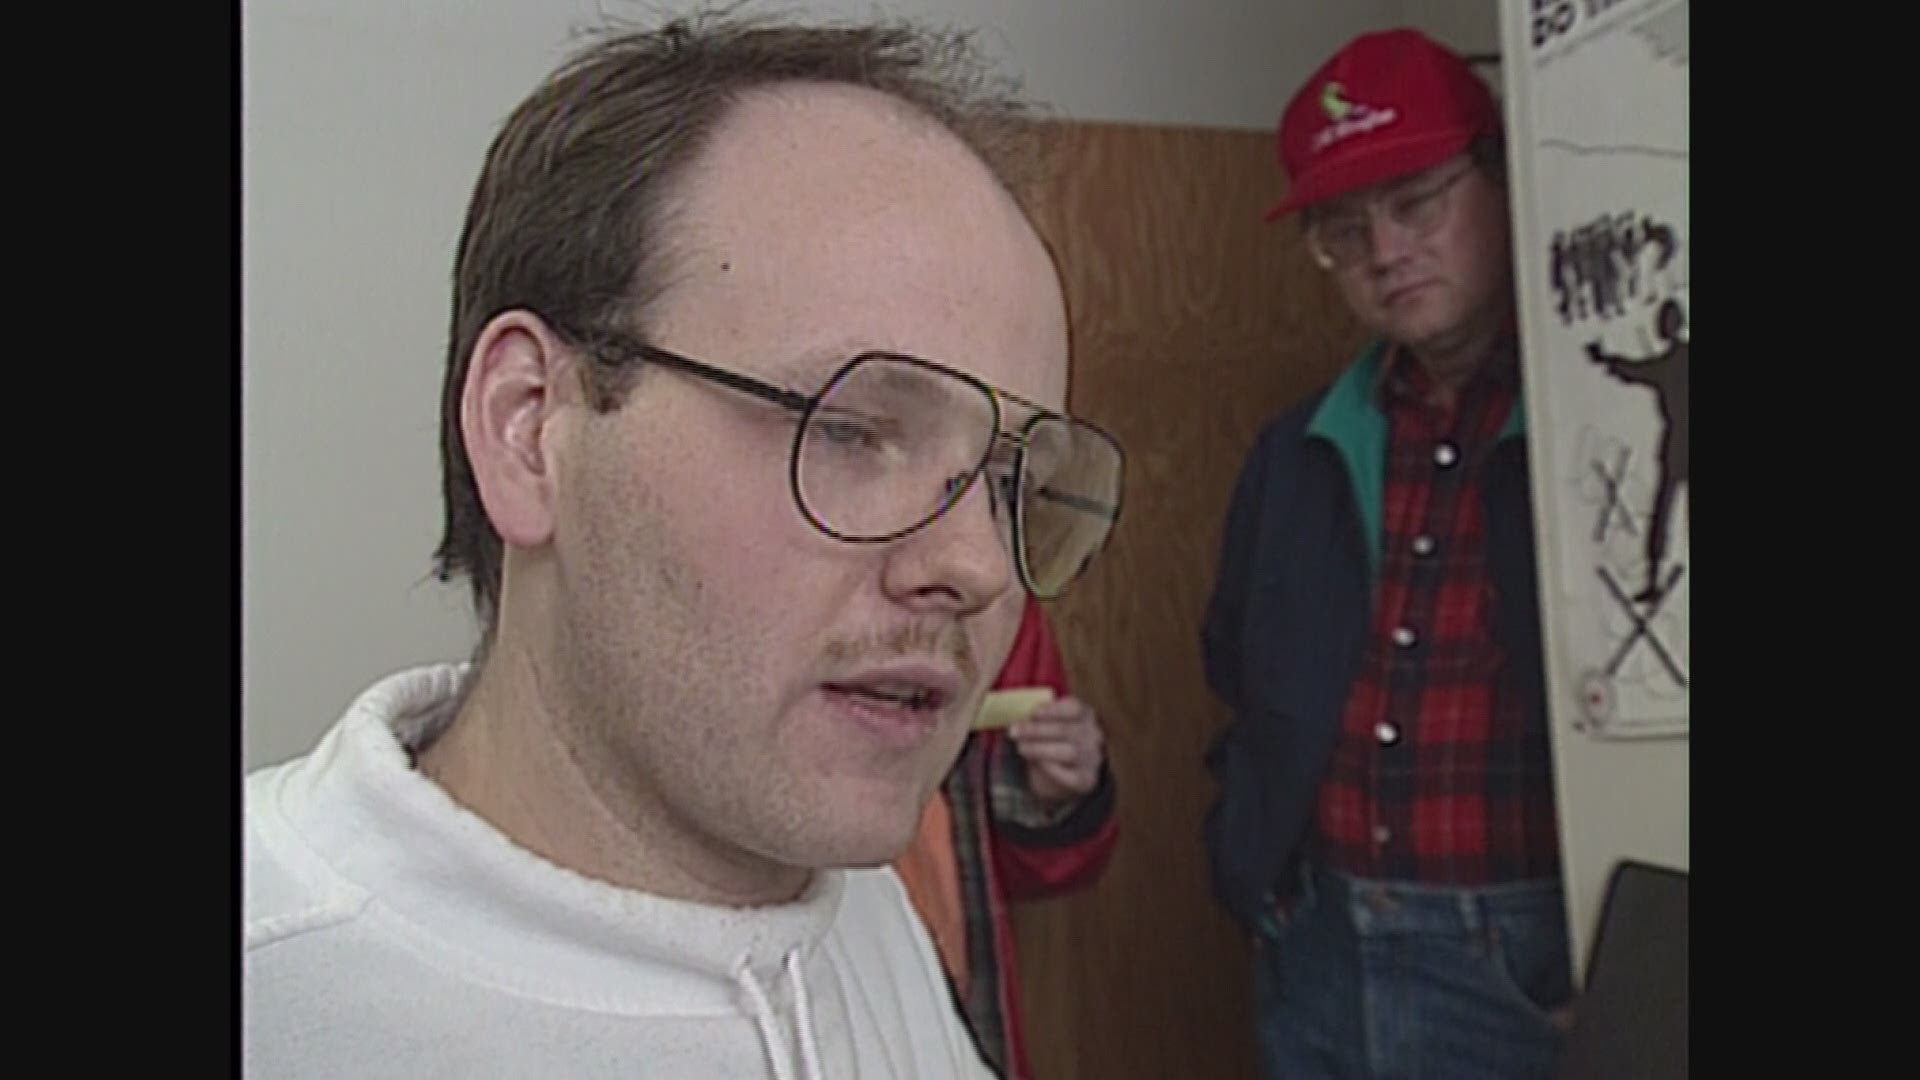 This is archive footage of the Red Cross stepping in to help folks across the region during the Blizzard of 1993. The story is from March 13, 1993.